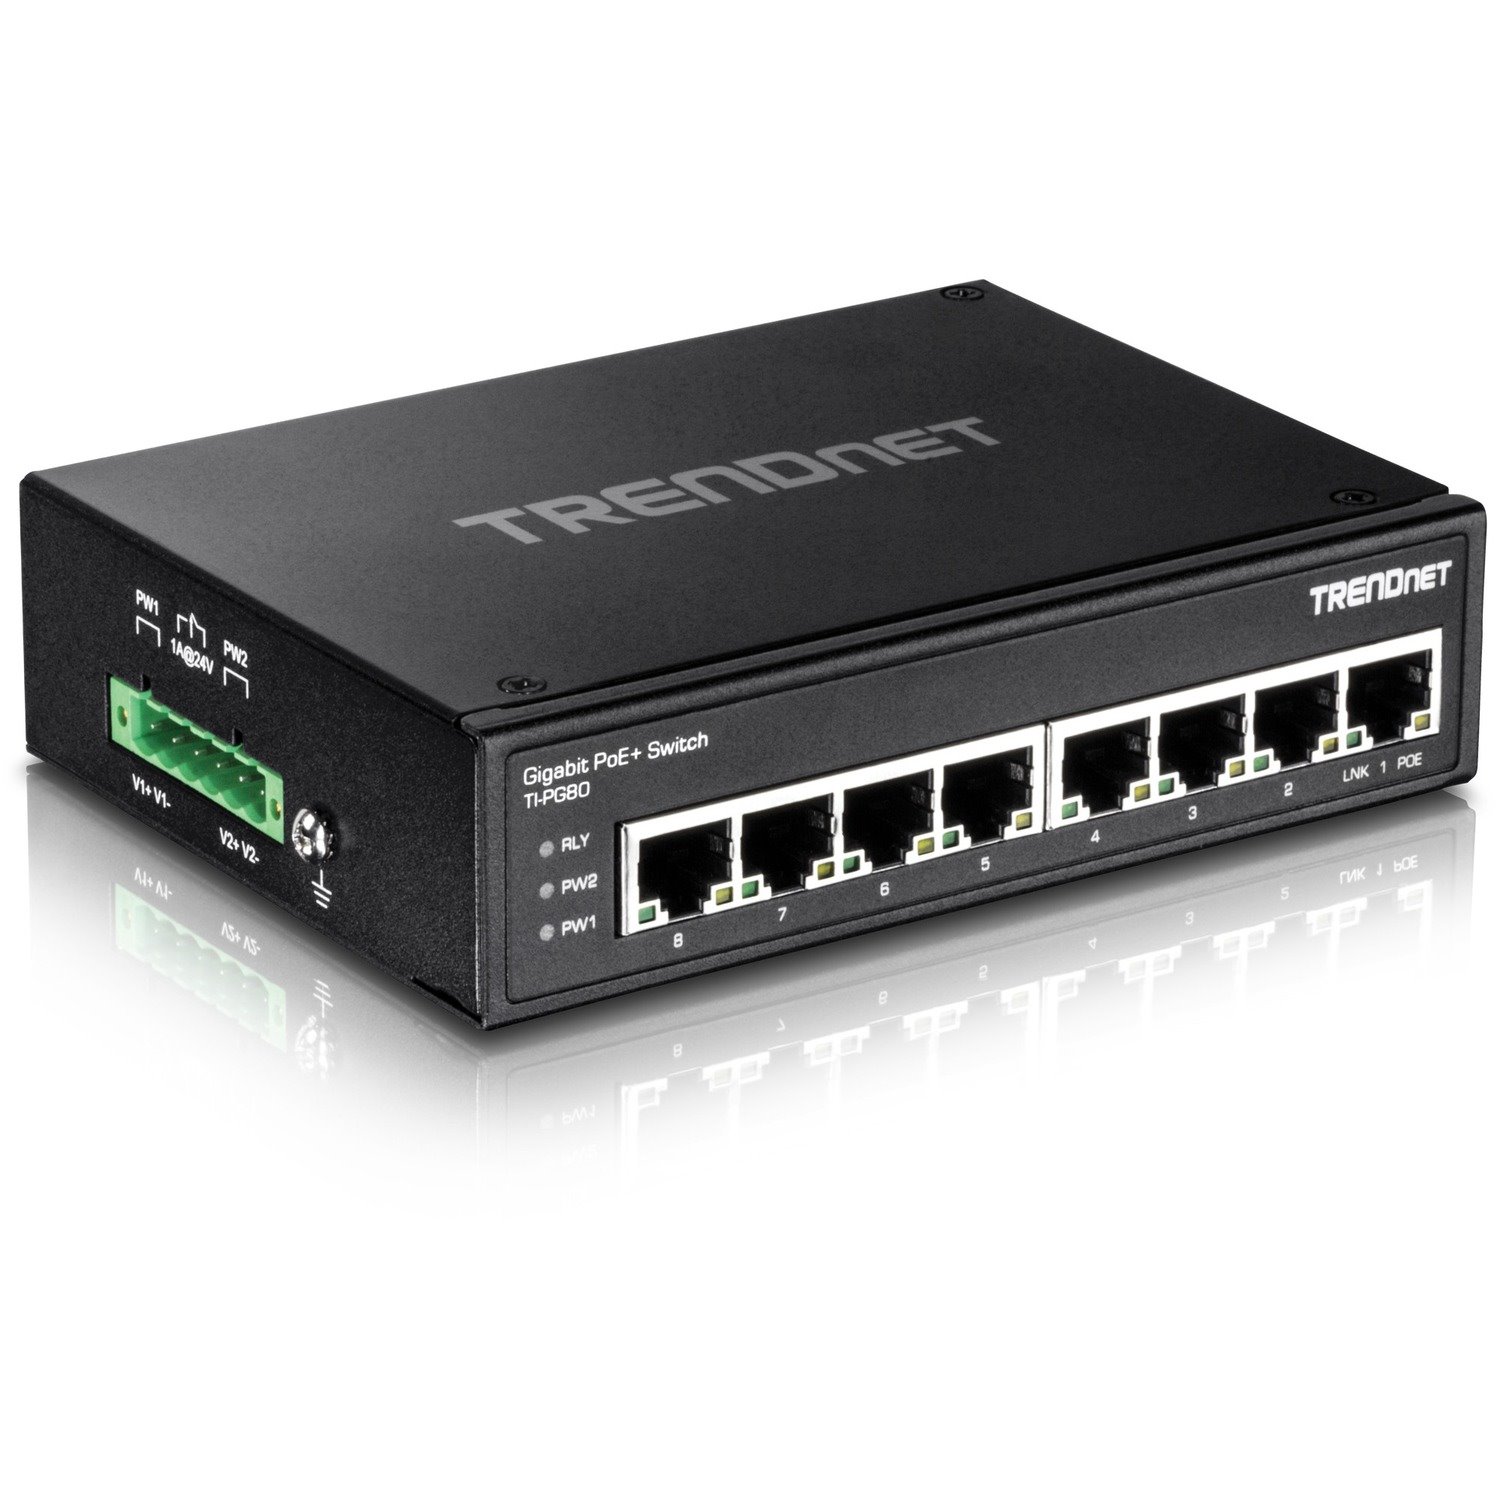 TRENDnet 8-Port Hardened Industrial Unmanaged Gigabit PoE+ DIN-Rail Switch, 200W Full PoE+ Power Budget, 16 Gbps Switching Capacity, IP30 Rated Network Switch, Lifetime Protection, Black, TI-PG80